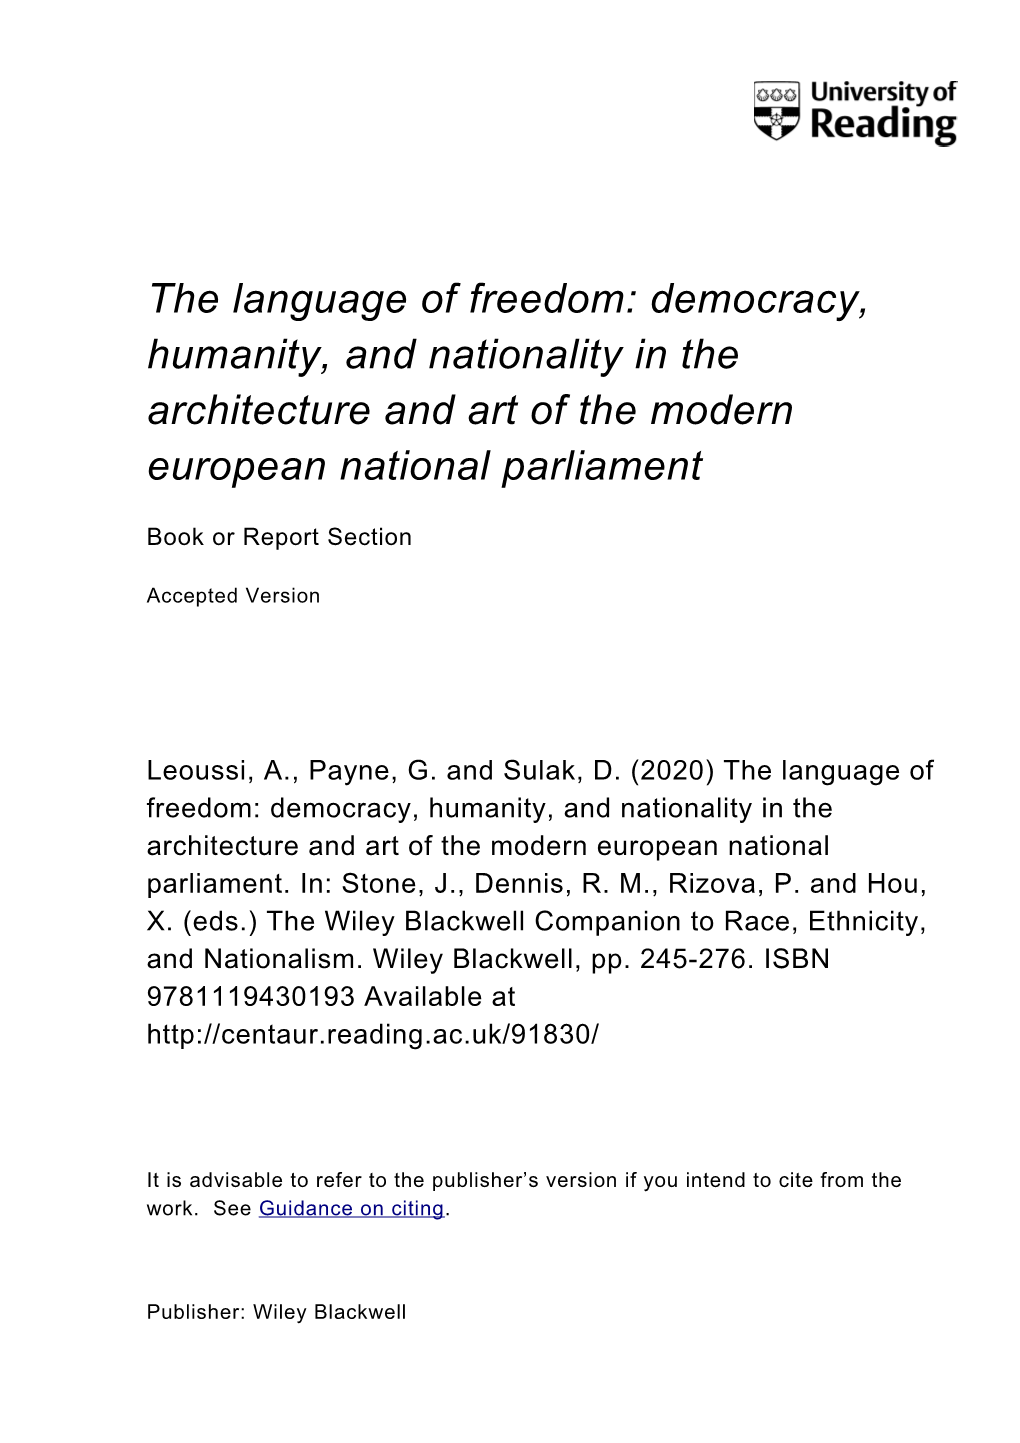 The Language of Freedom: Democracy, Humanity, and Nationality in the Architecture and Art of the Modern European National Parliament